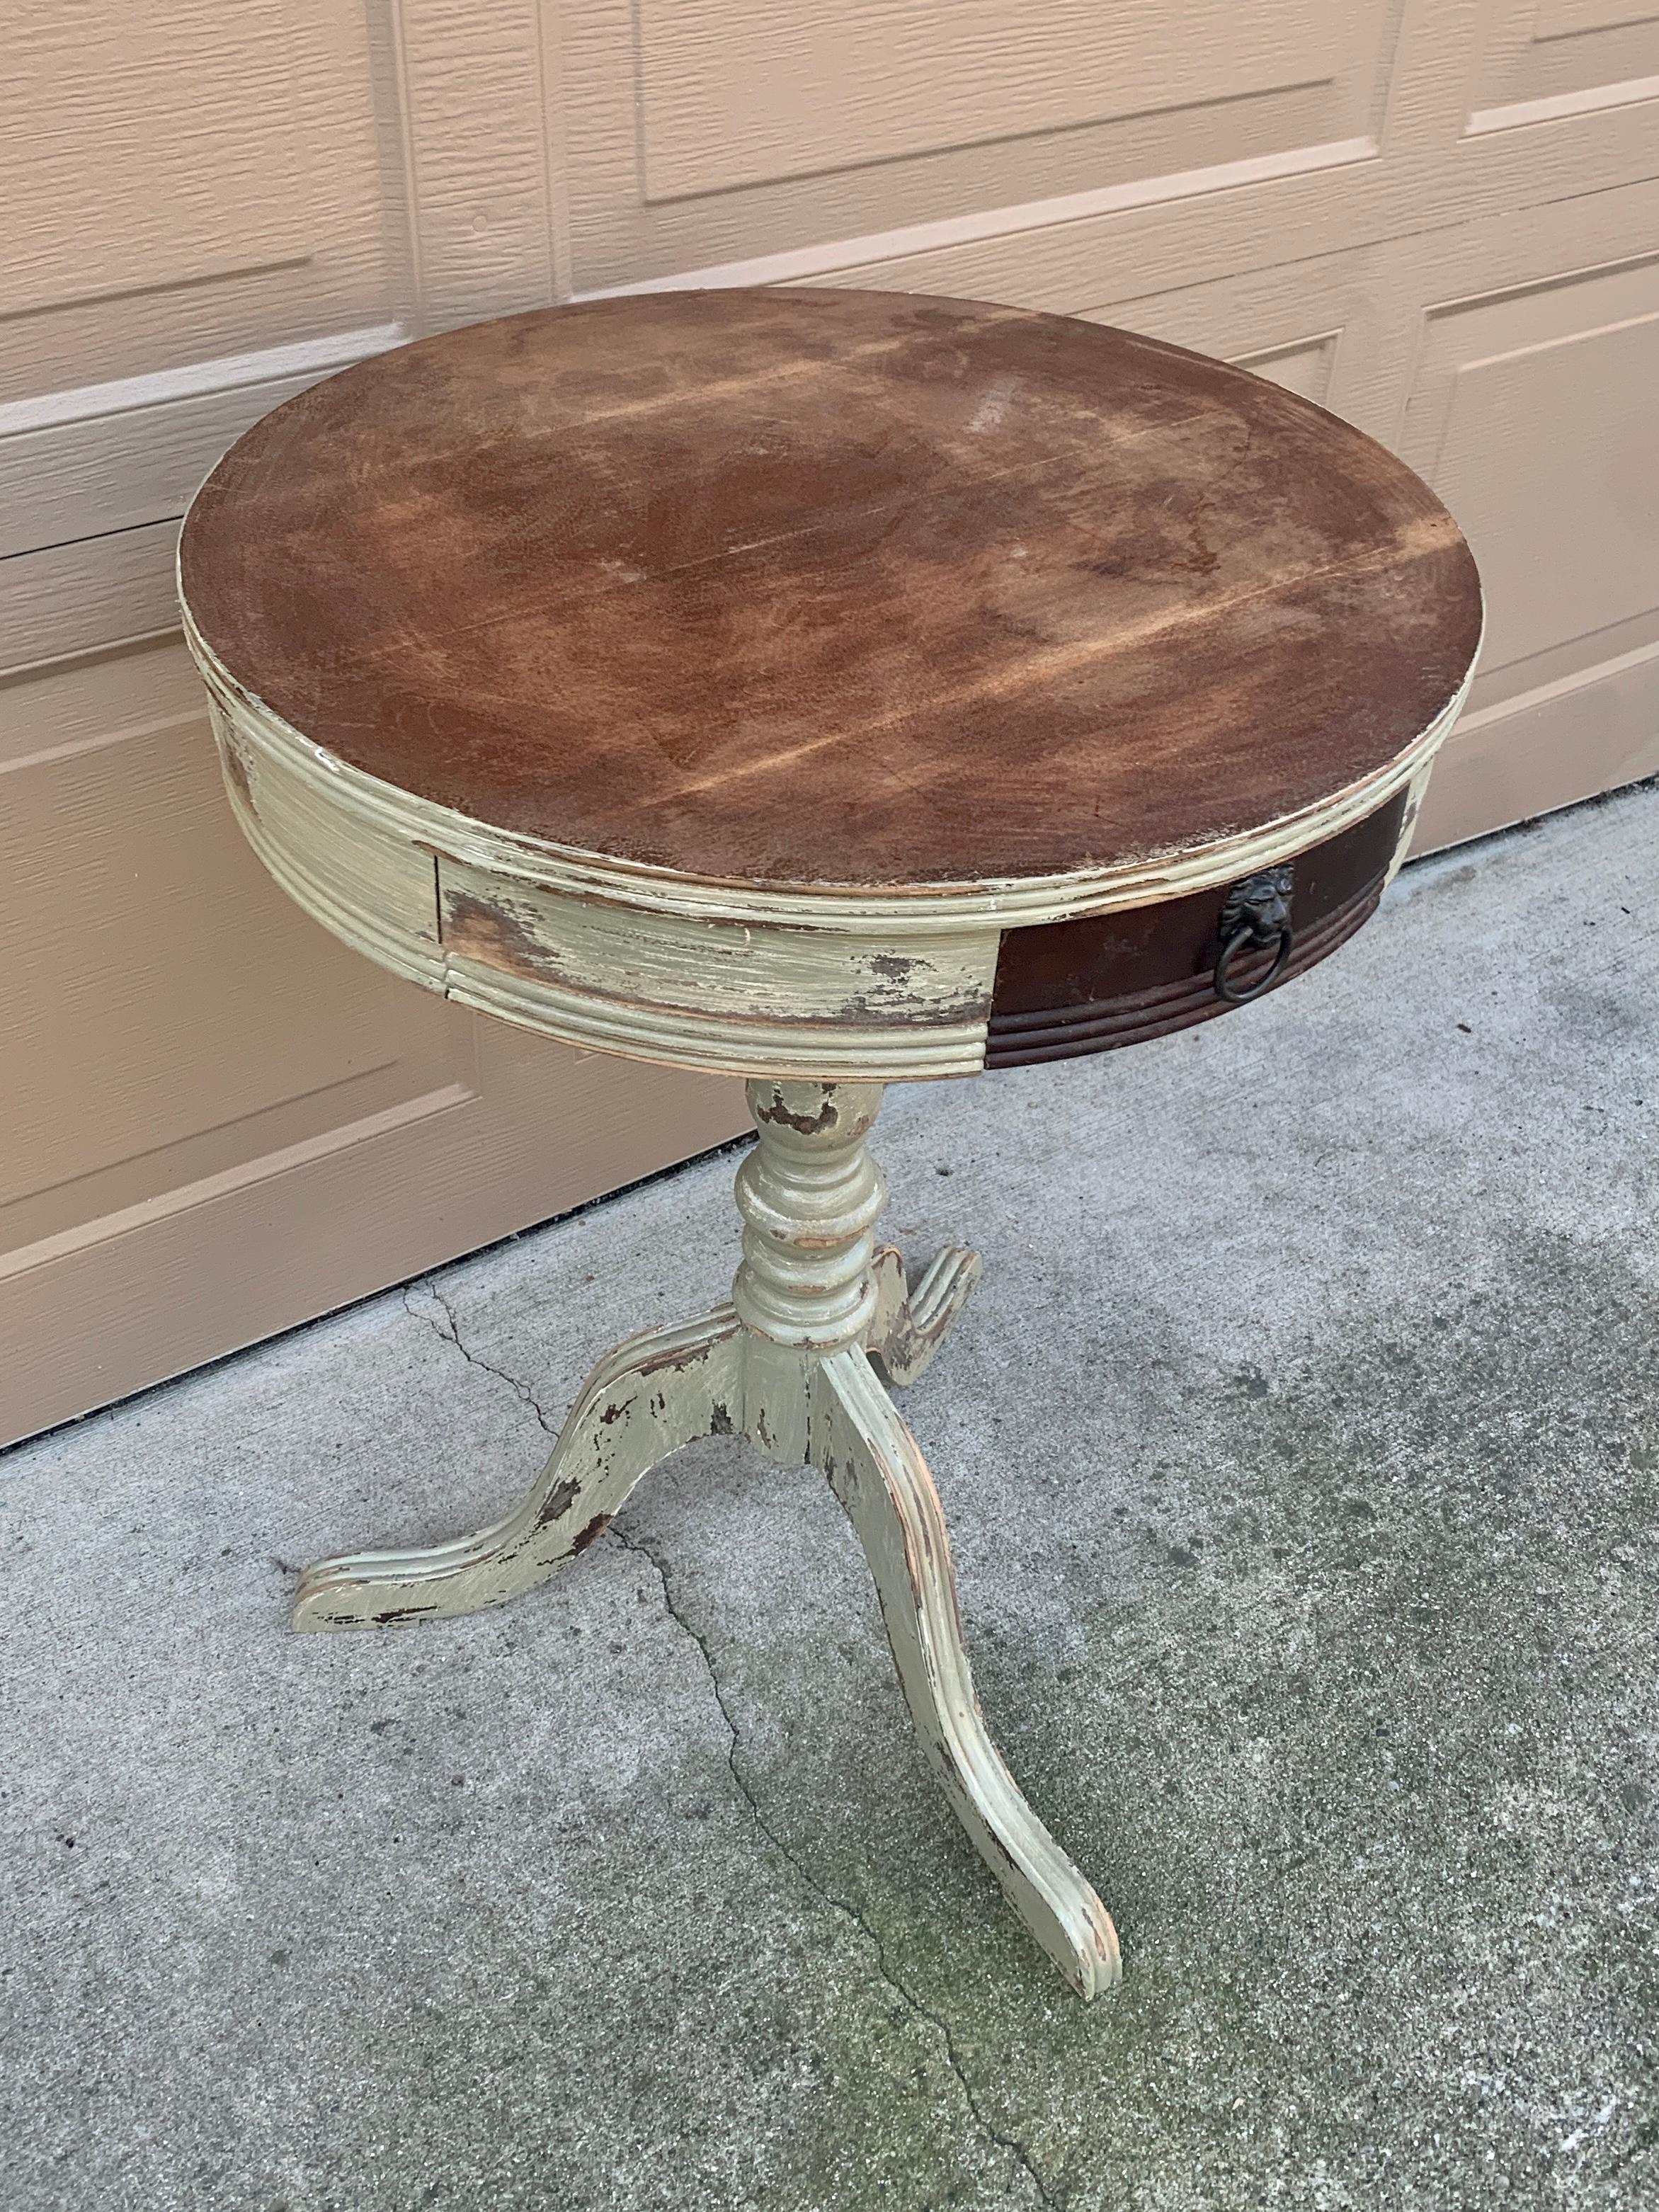 Antique American Regency Round Painted Walnut Side Table, Late 19th Century For Sale 3